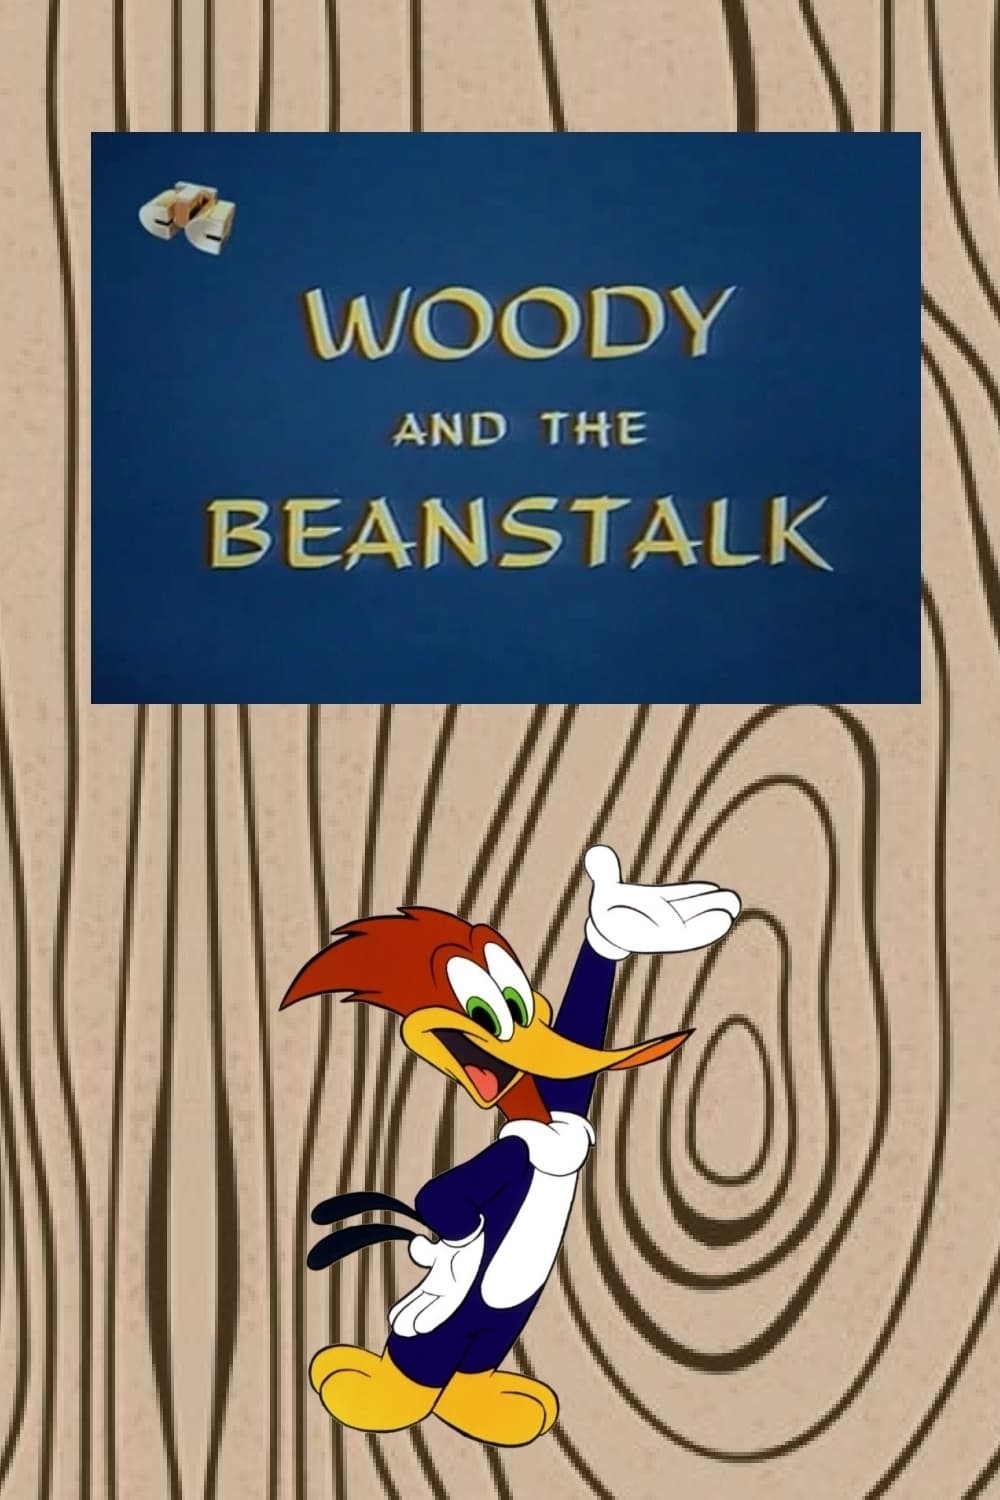 Woody and the Beanstalk (1966)